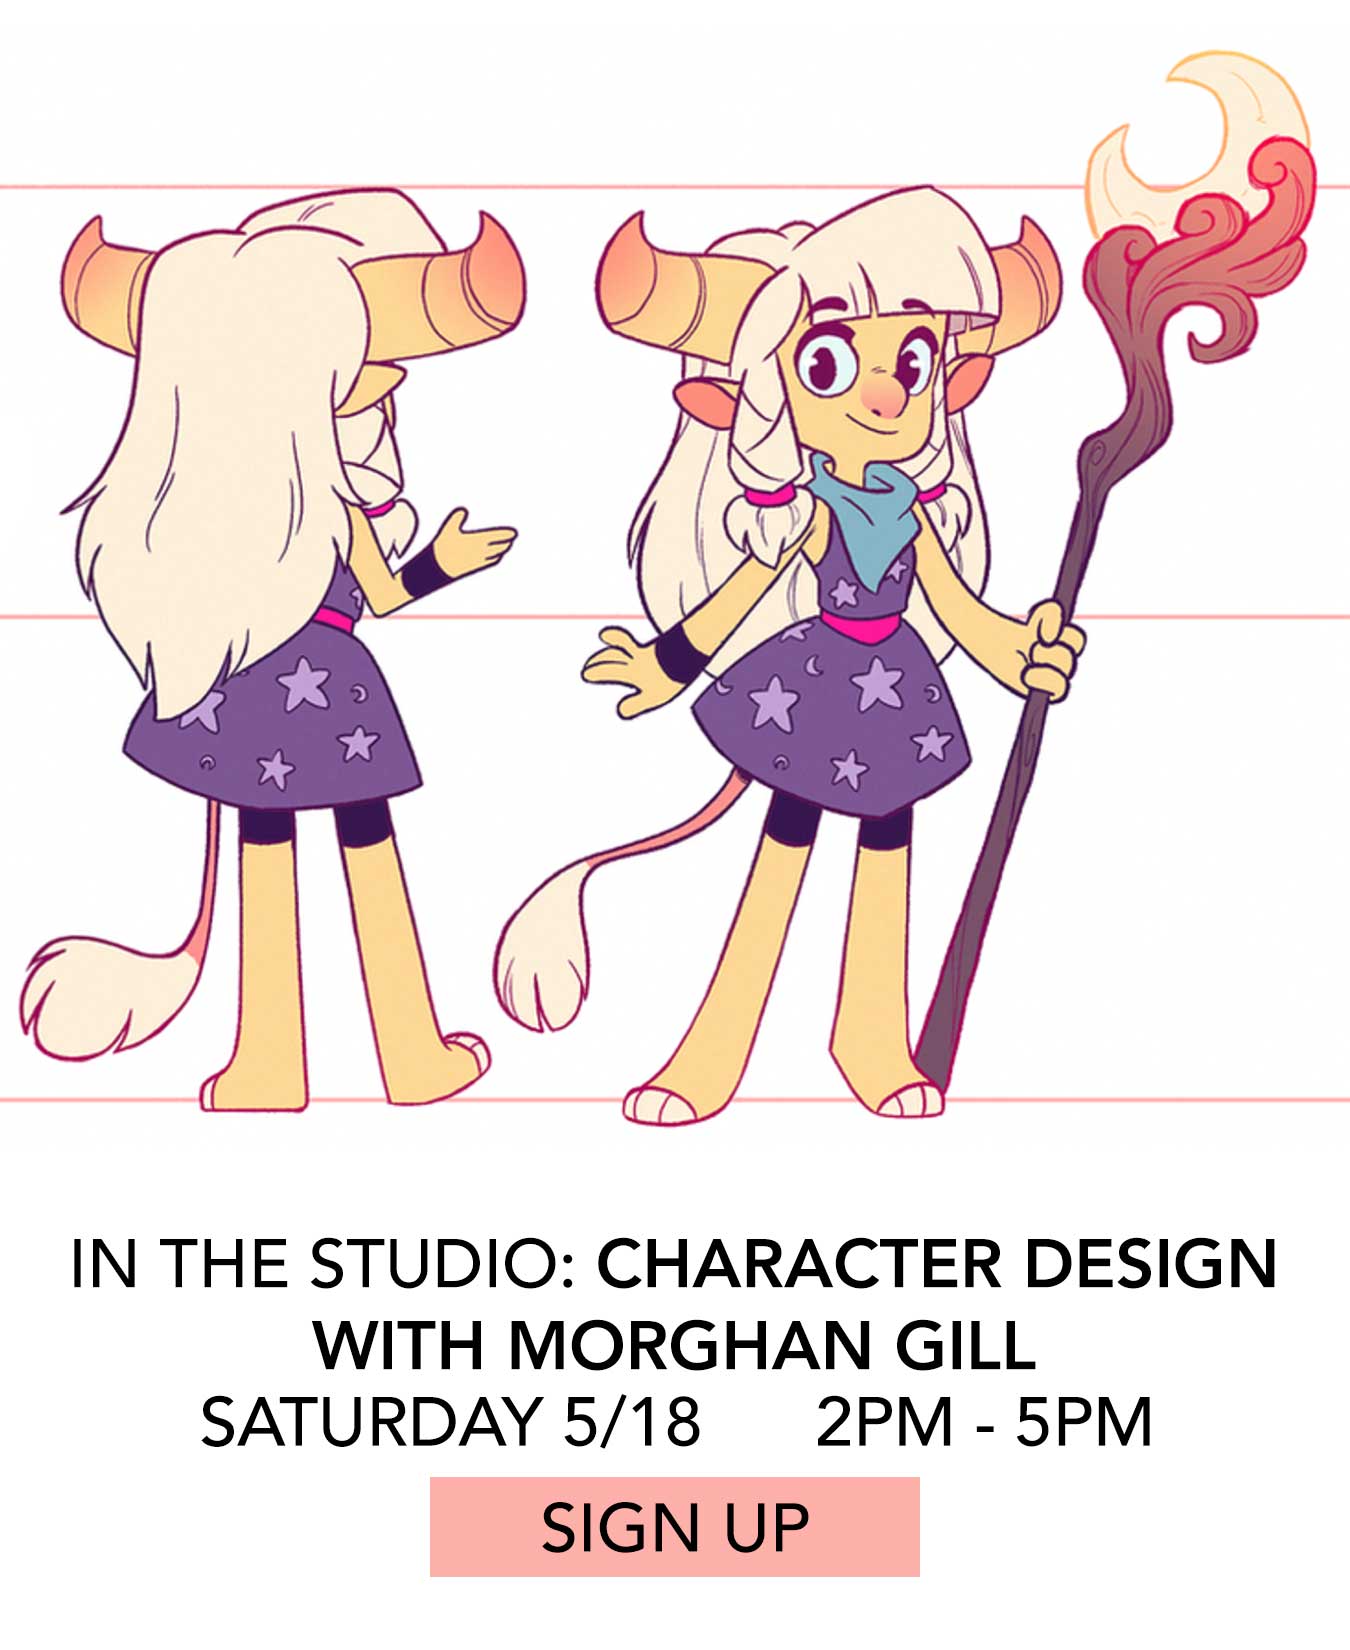 In the Studio: Character Design with Morghan Gill. Saturday 5/18 from 2:00pm to 5:00pm. Click to Sign Up.